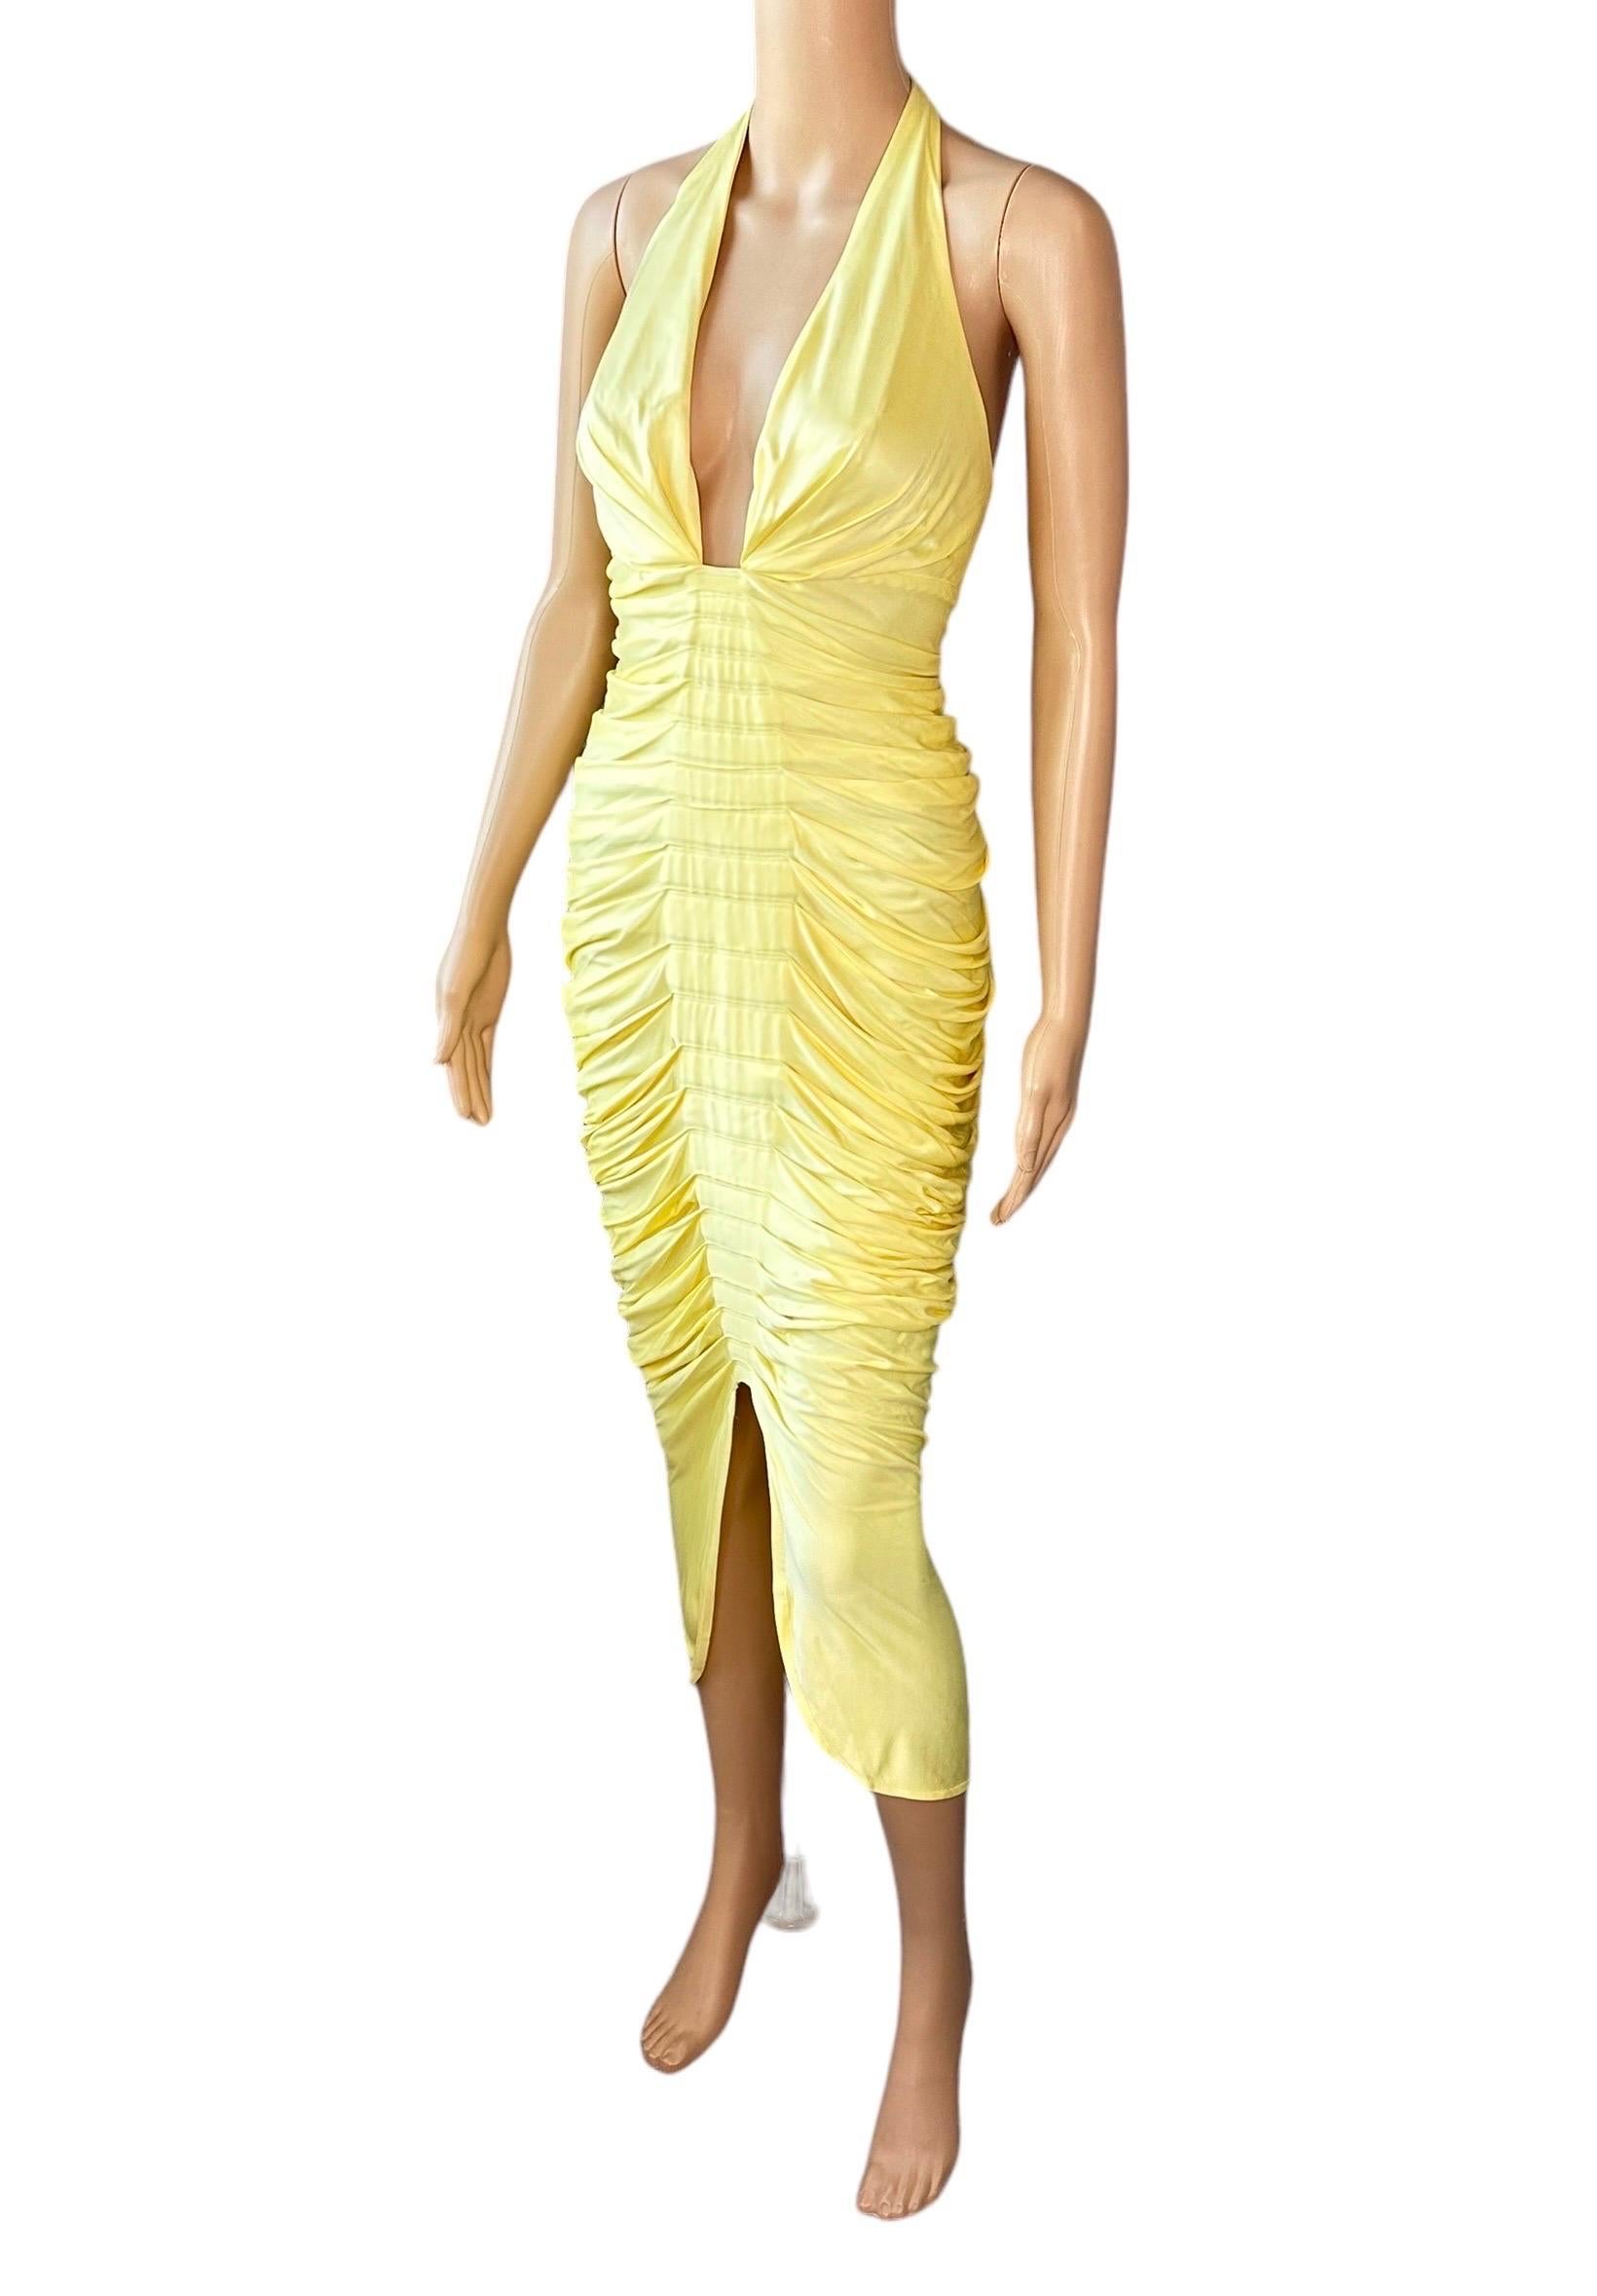 Versace S/S 2005 Runway Plunging Hi-Low Ruched Open Back Evening Dress Gown For Sale 3